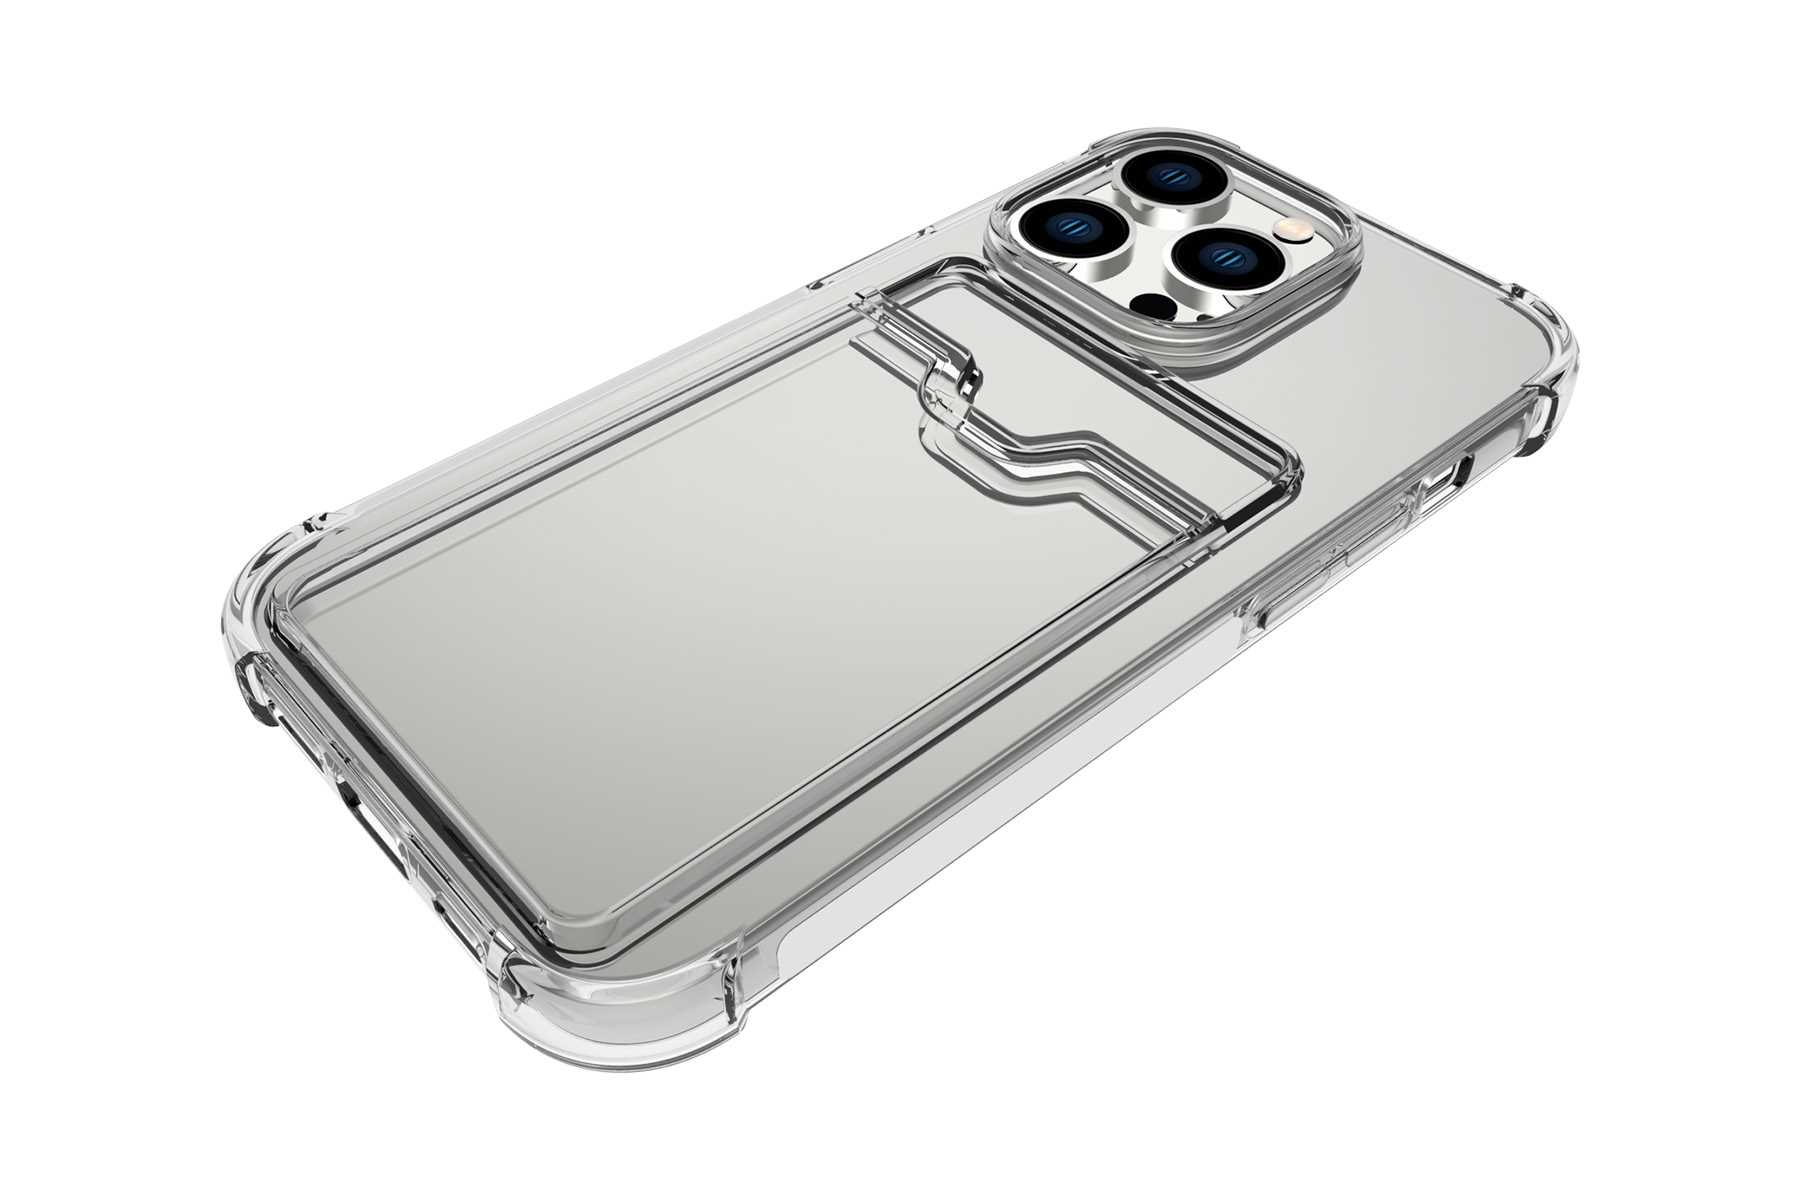 MTB MORE ENERGY Apple, Transparent mit Pro, Armor 14 Backcover, iPhone Kartenfach, Case Clear